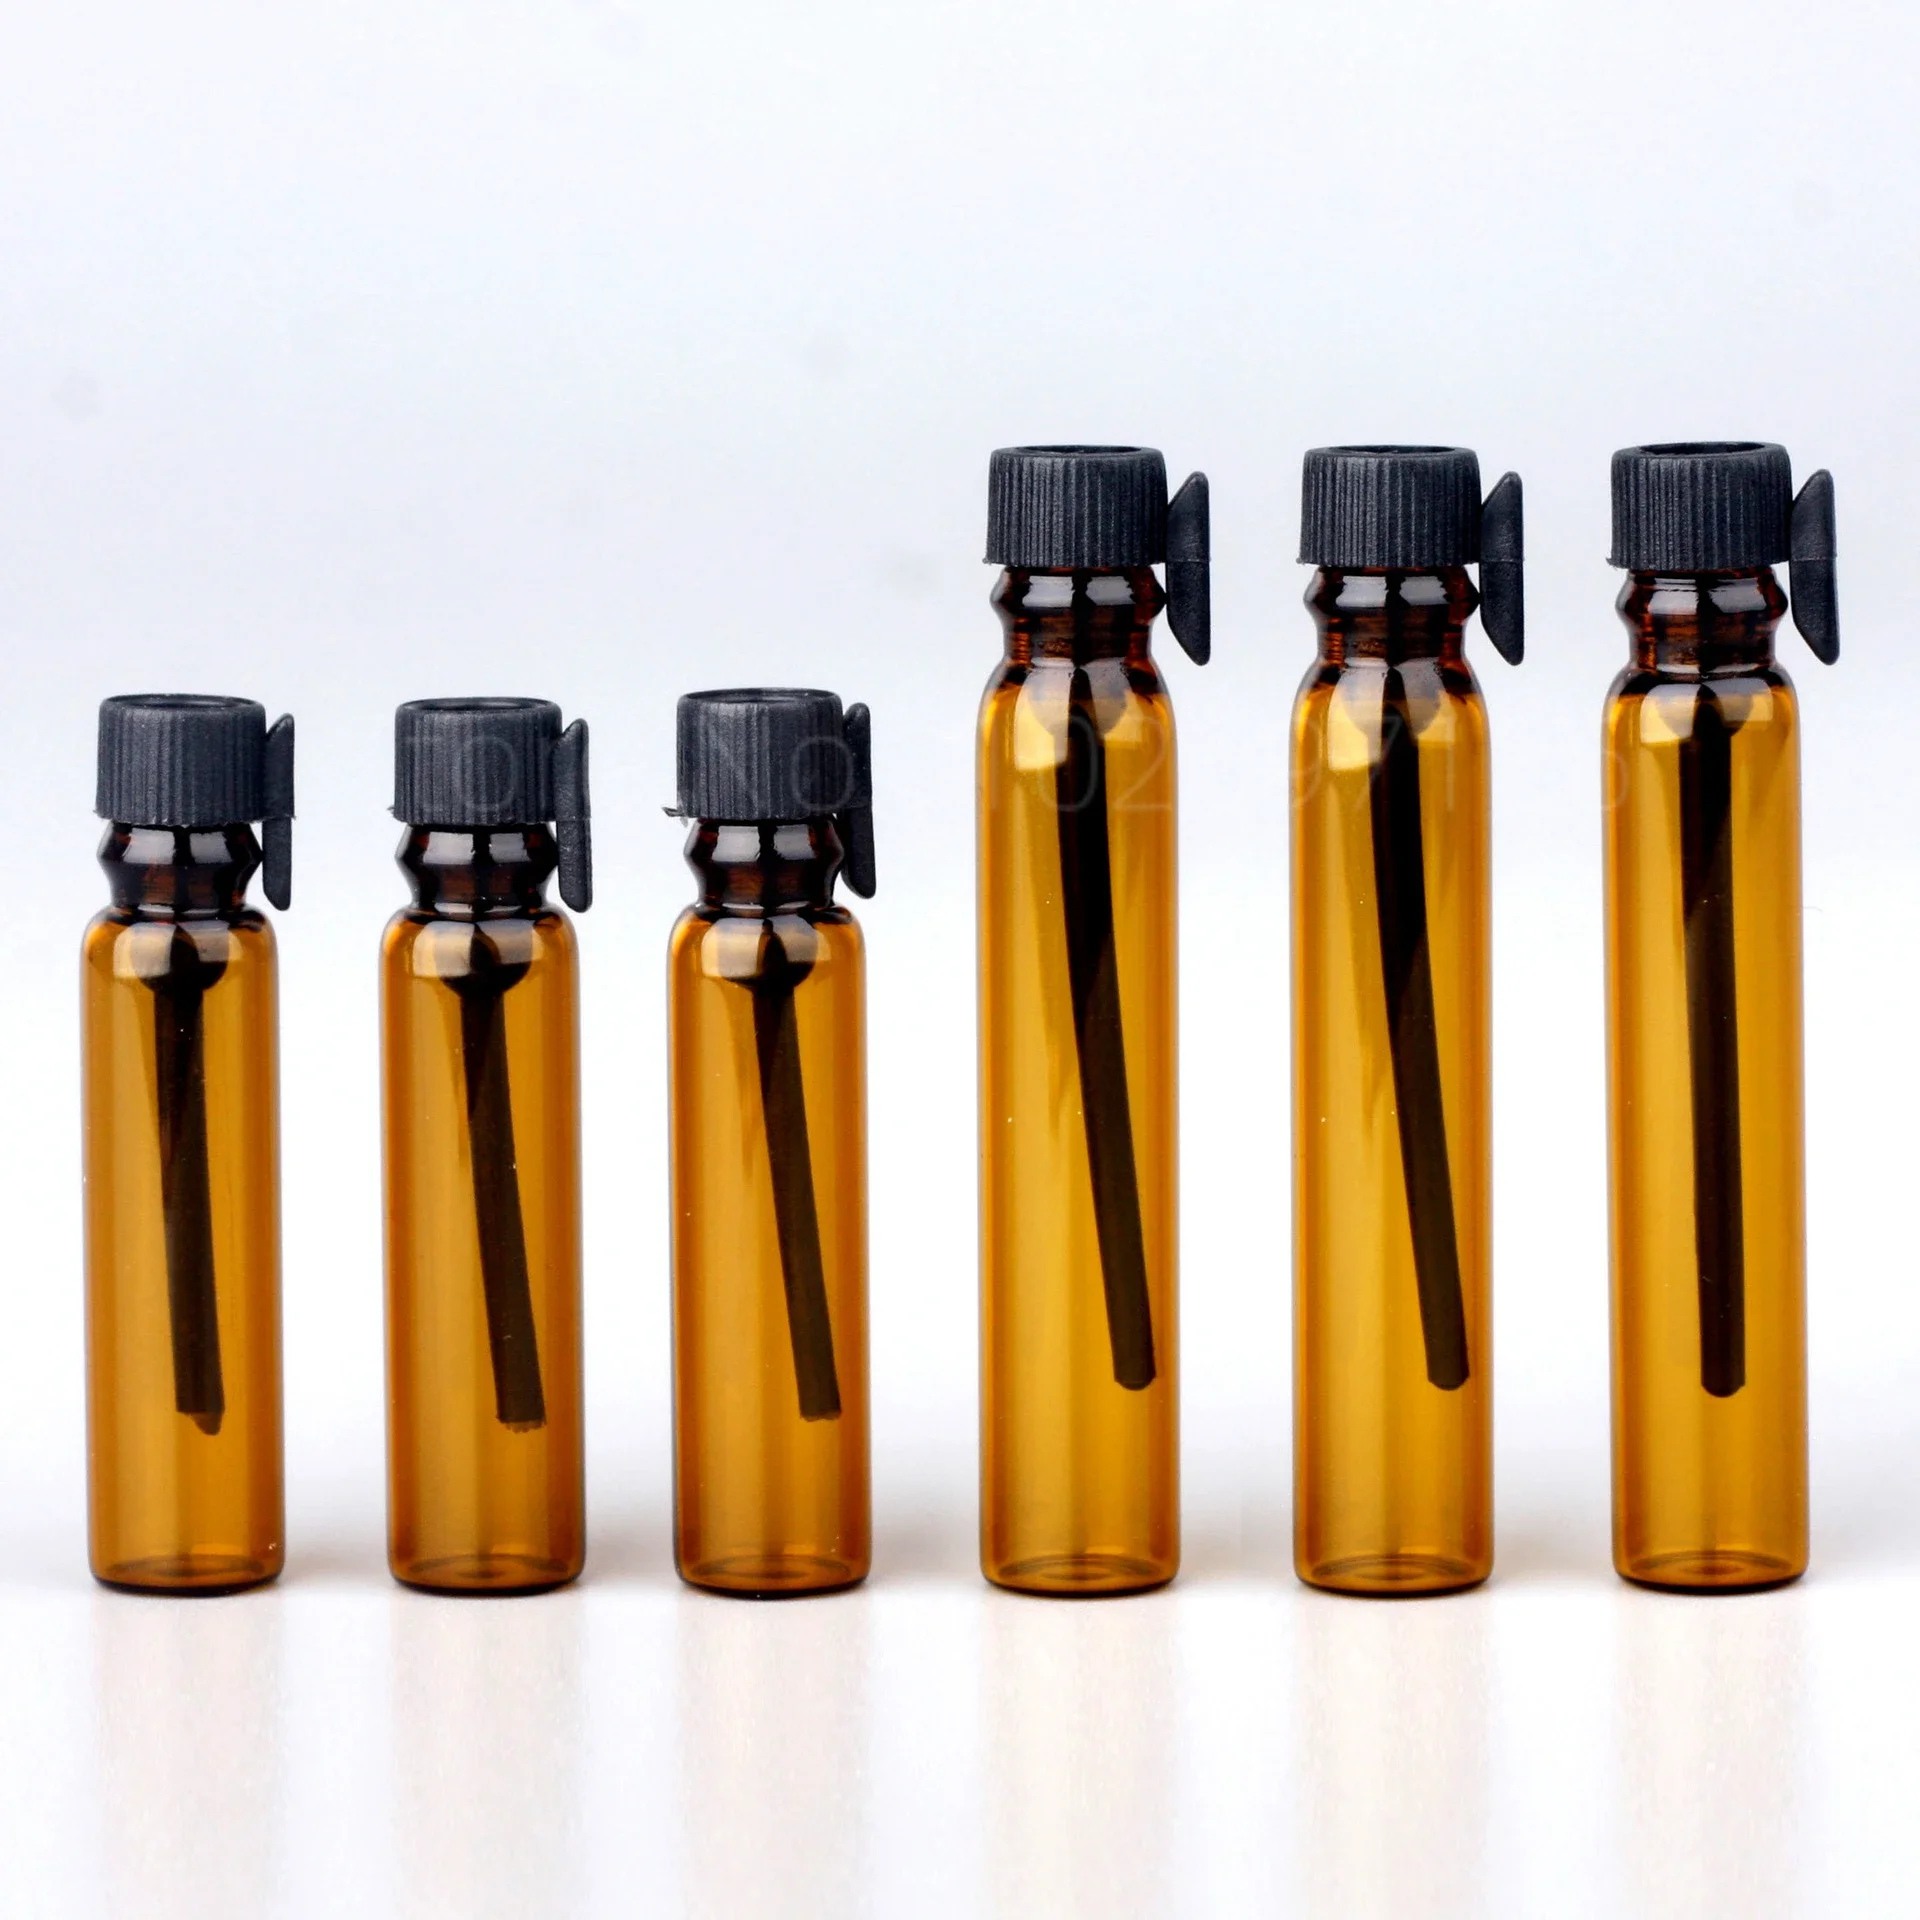 Glass Dropper Bottle Transparent Mini 1ml 2ml Stick Essential Oil with Inner Stopper Sample Trial Use Perfume Sub Bottles Empty small test tube 10ml 16 30 30mm glass bottles crafts jars stopper transparent empty glass vial diy bottle corks mini container